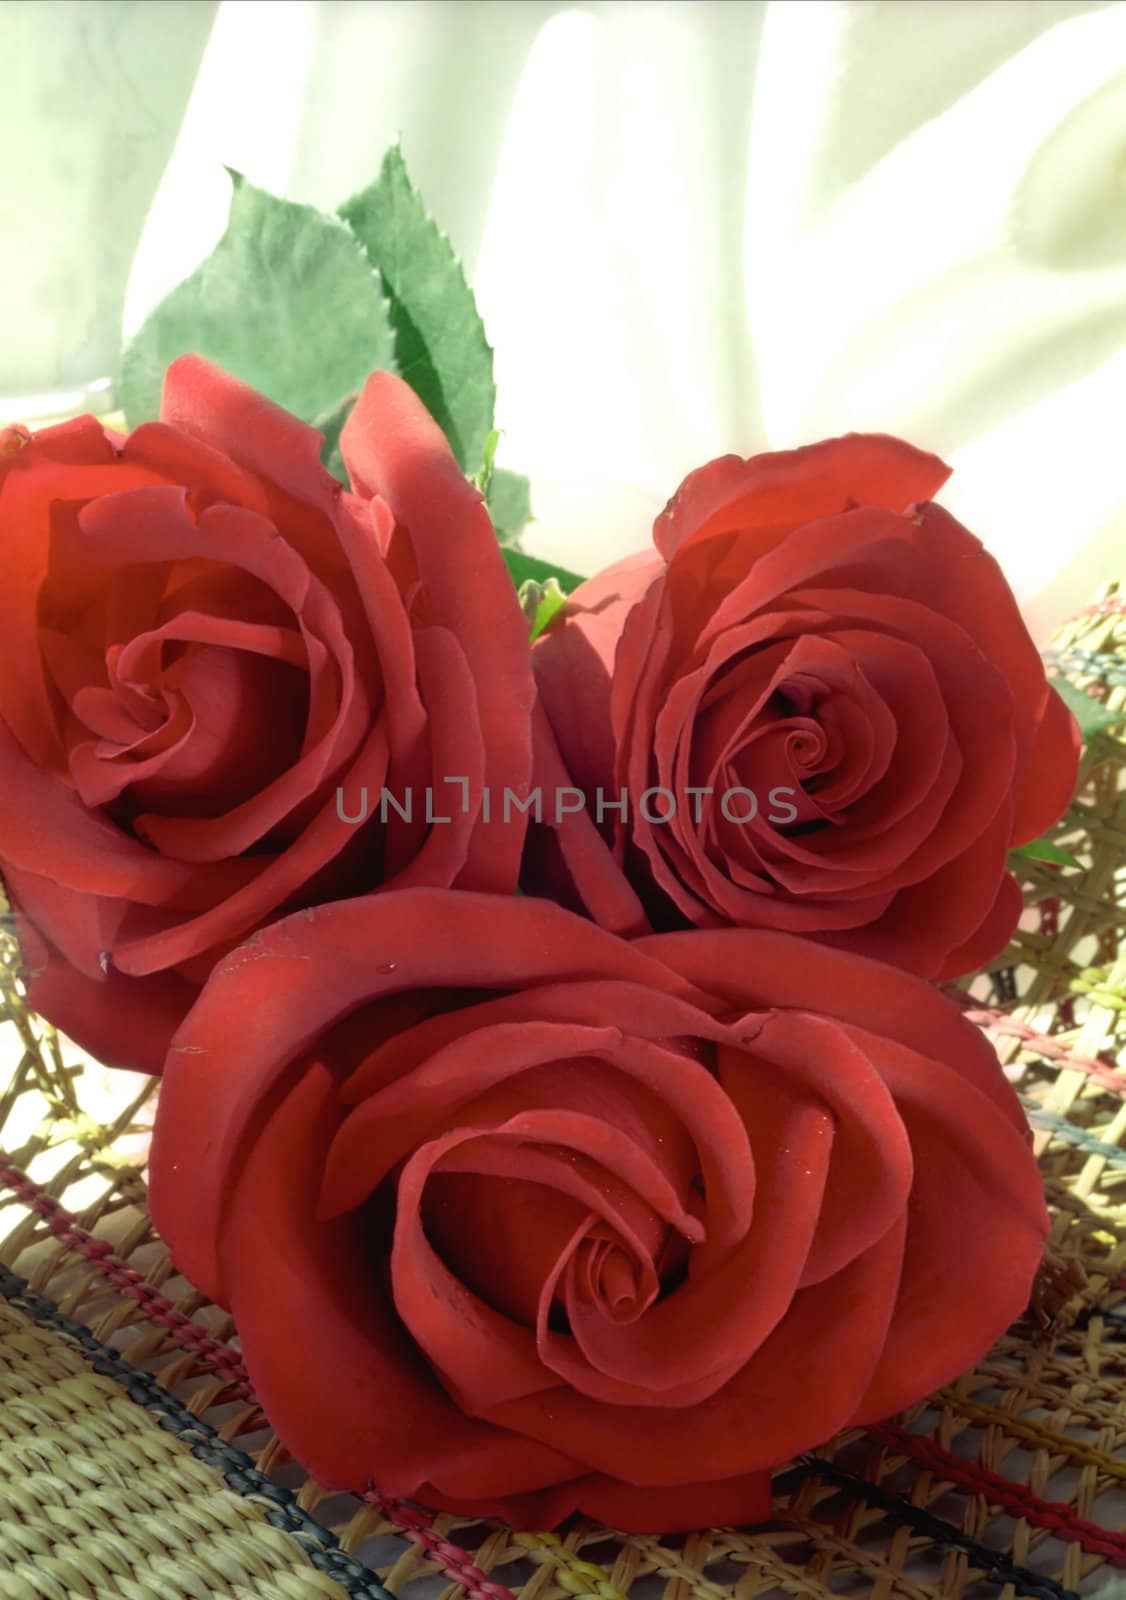 Nosegay of three red roses on light background